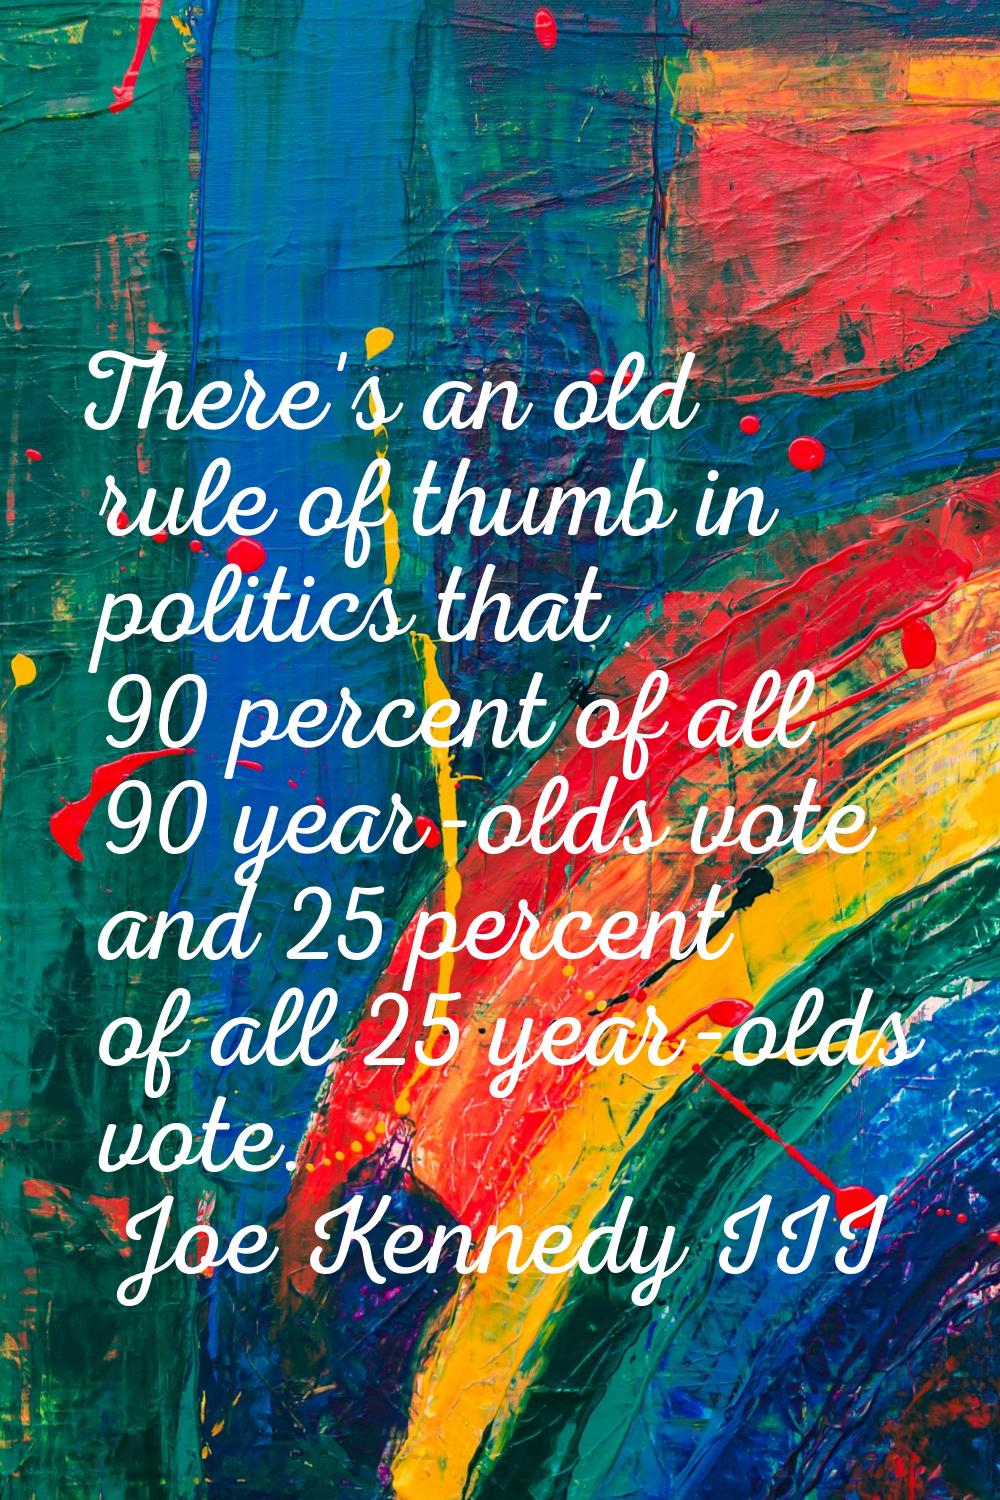 There's an old rule of thumb in politics that 90 percent of all 90 year-olds vote and 25 percent of